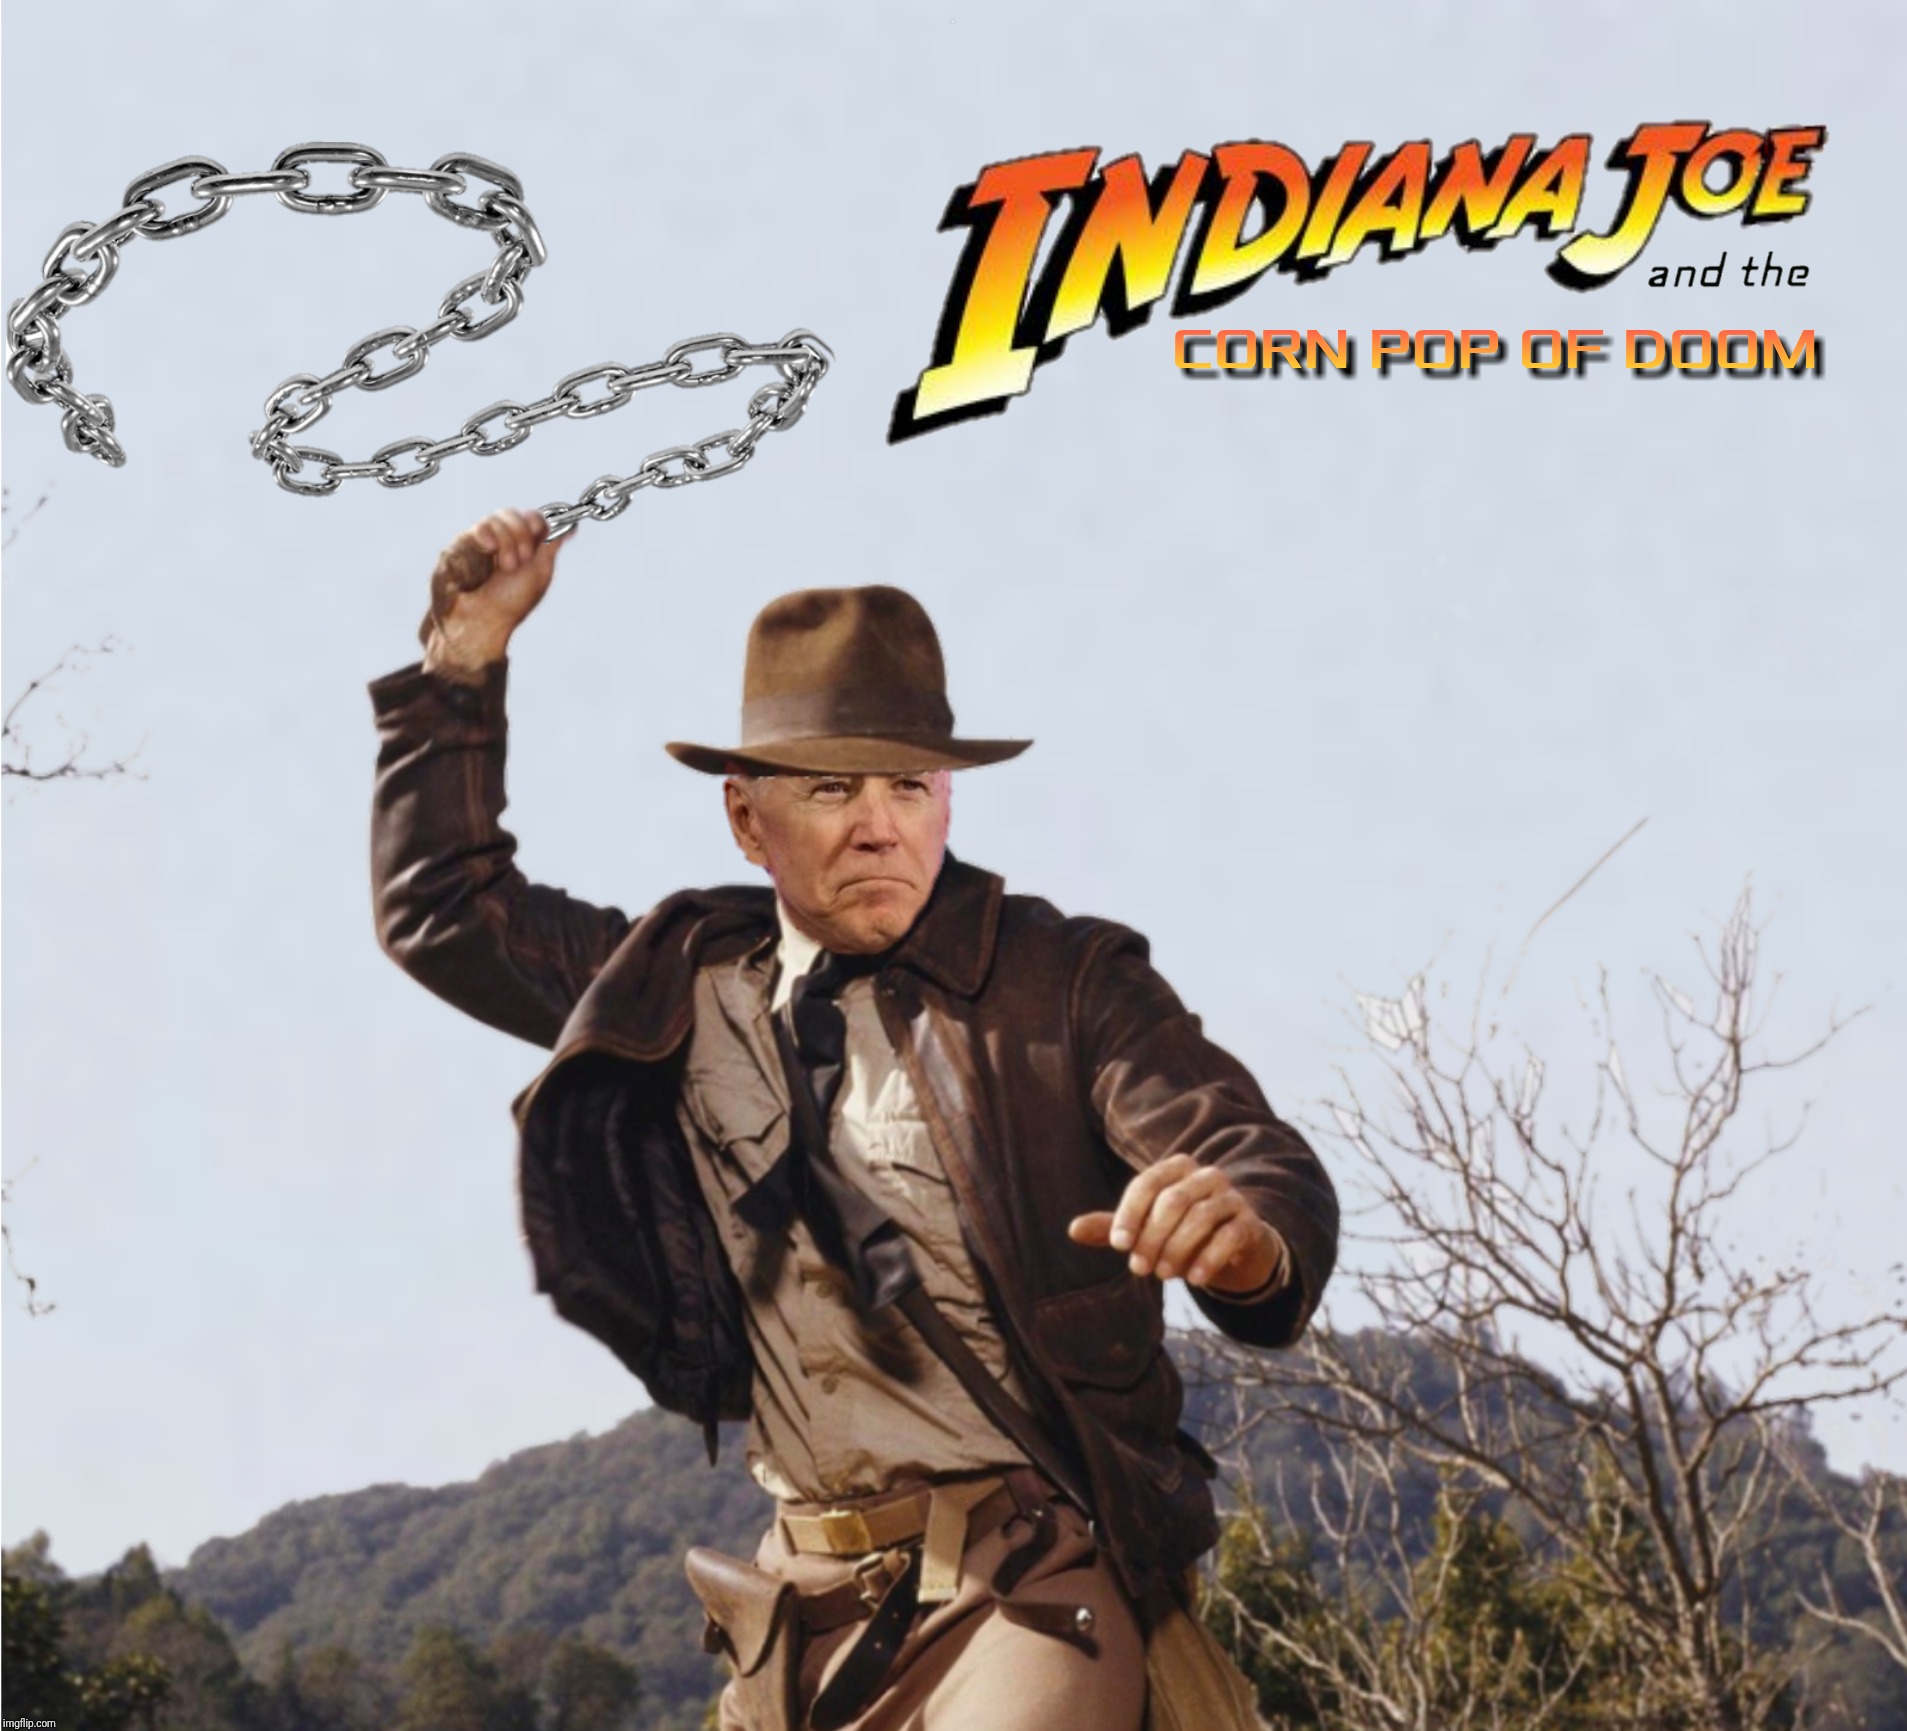 Bad Photoshop Sunday presents:  The face you make when you're getting ready to rumble with Corn Pop | J | image tagged in bad photoshop sunday,indiana jones,indiana joe,corn pop,chain | made w/ Imgflip meme maker